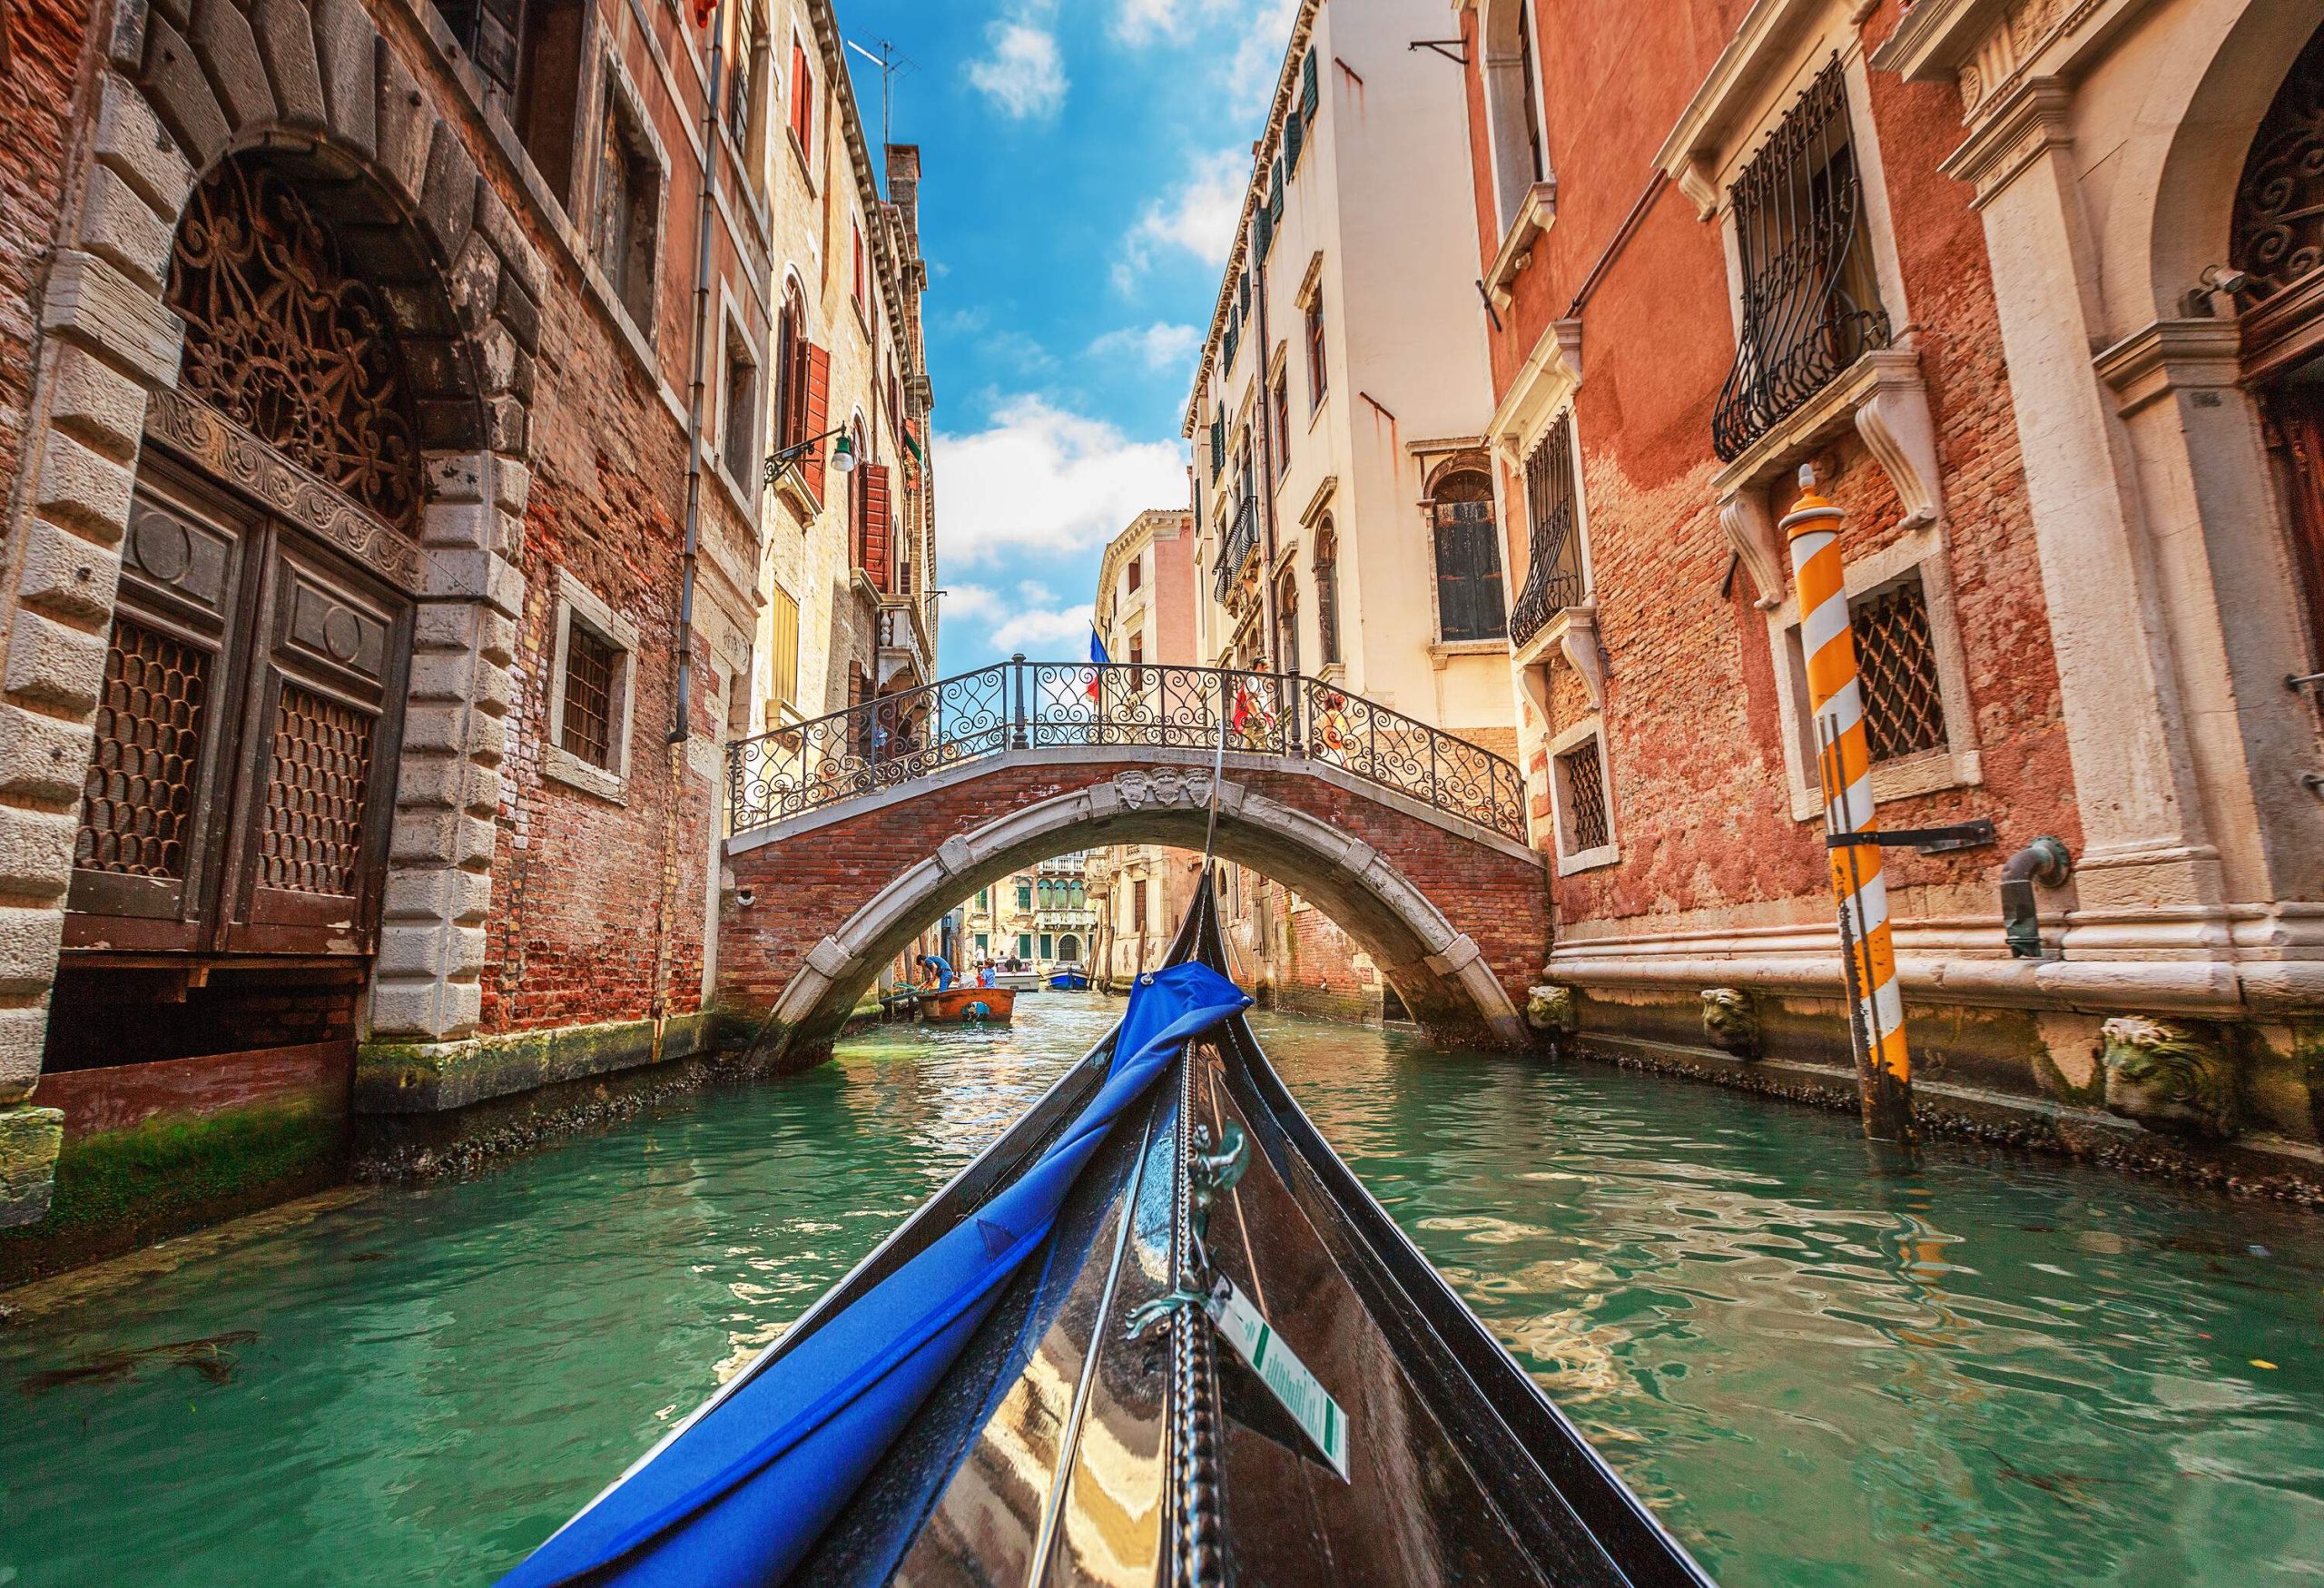 A gondola cruises a water canal as it approach a bridge between tall buildings.